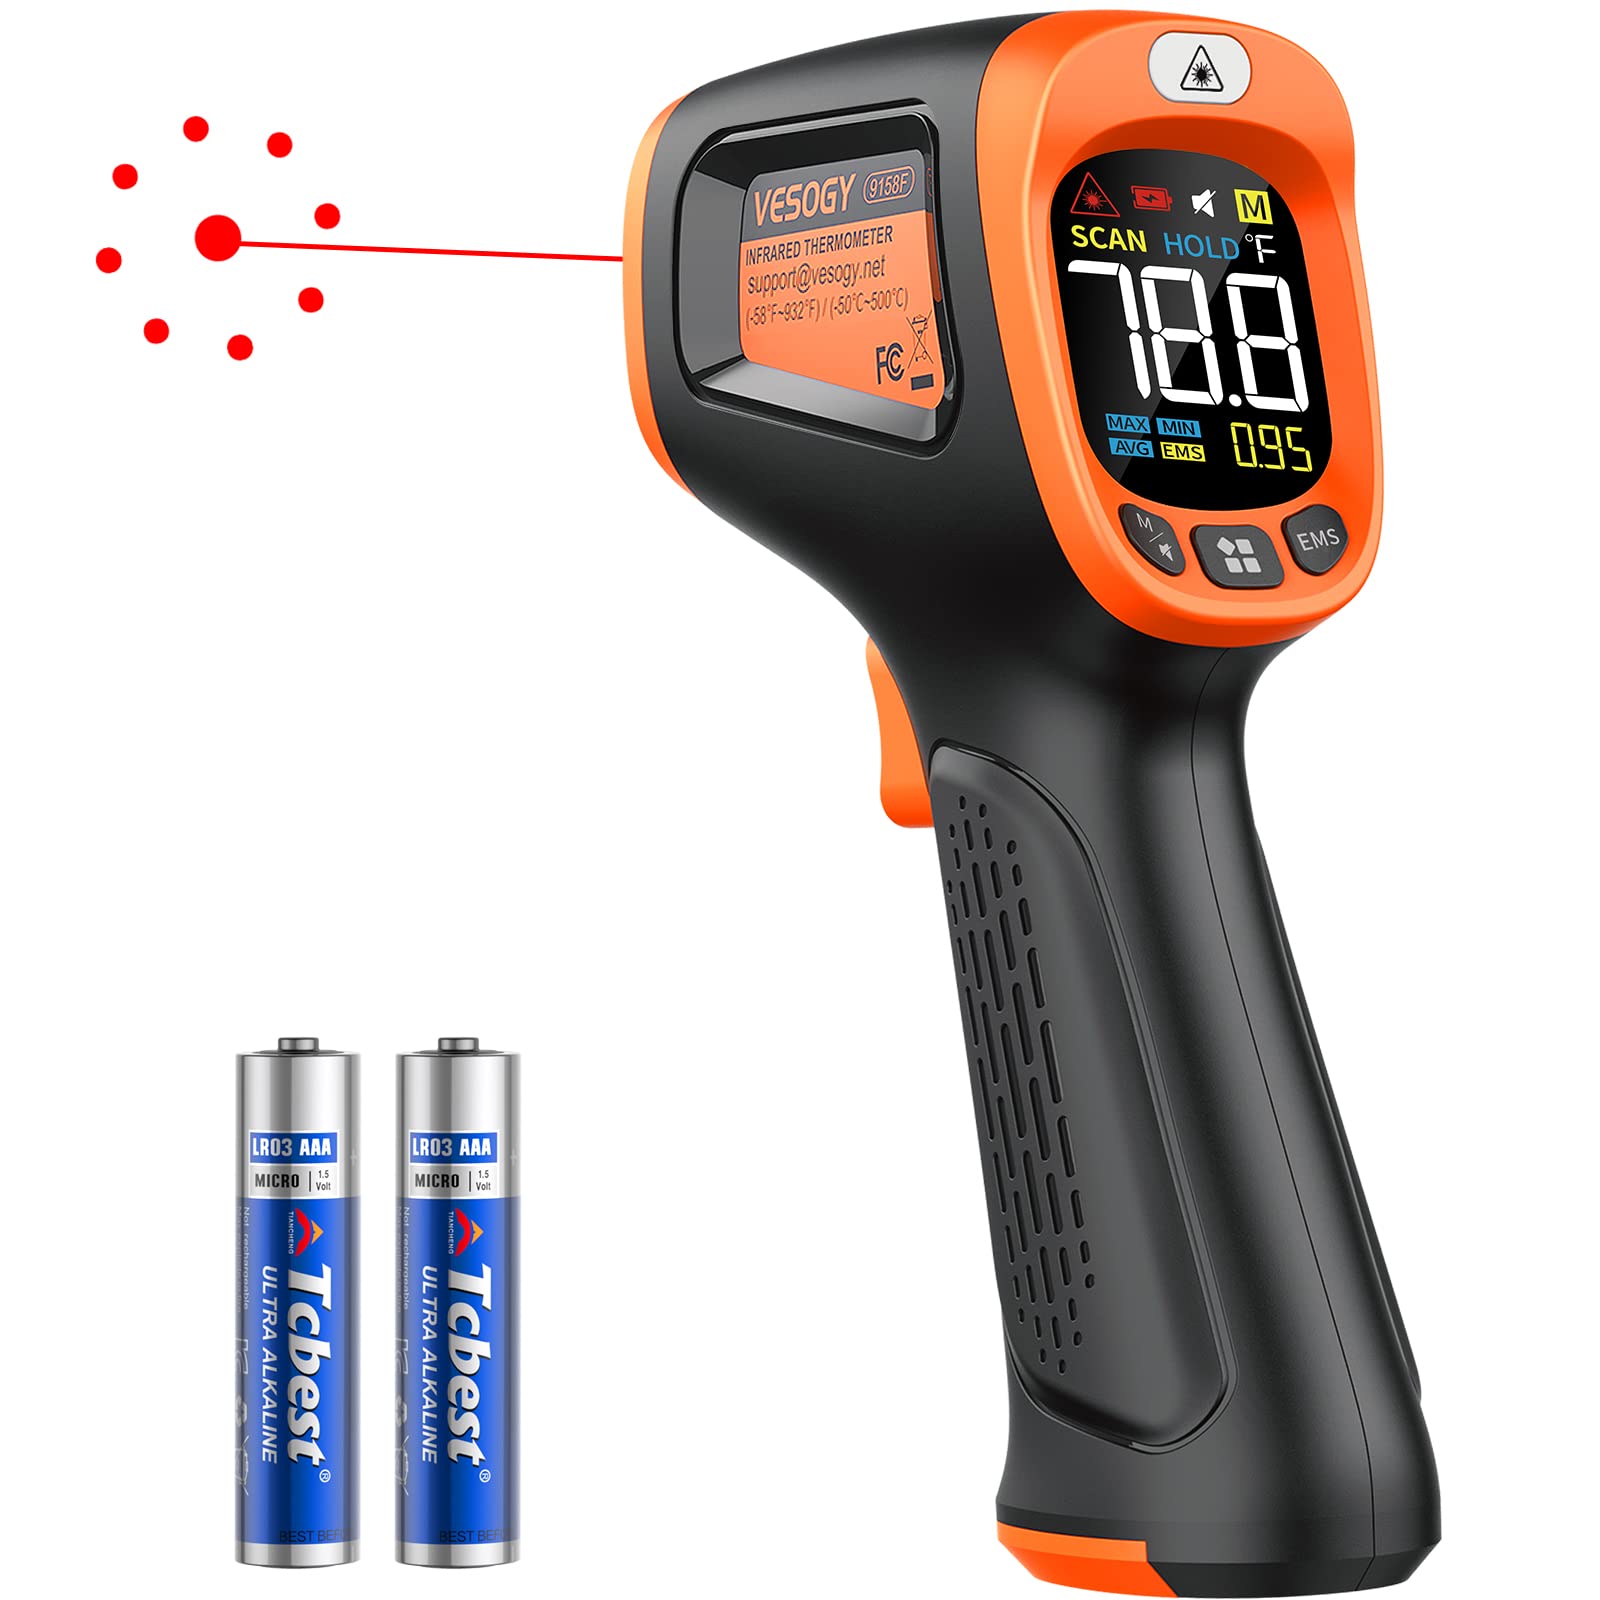 Vesogy Infrared Thermometer Temperature gun -58AF 932AF, Digital Laser Thermometer gun for cooking, Pizza Oven, grill & Engine, IR Ther